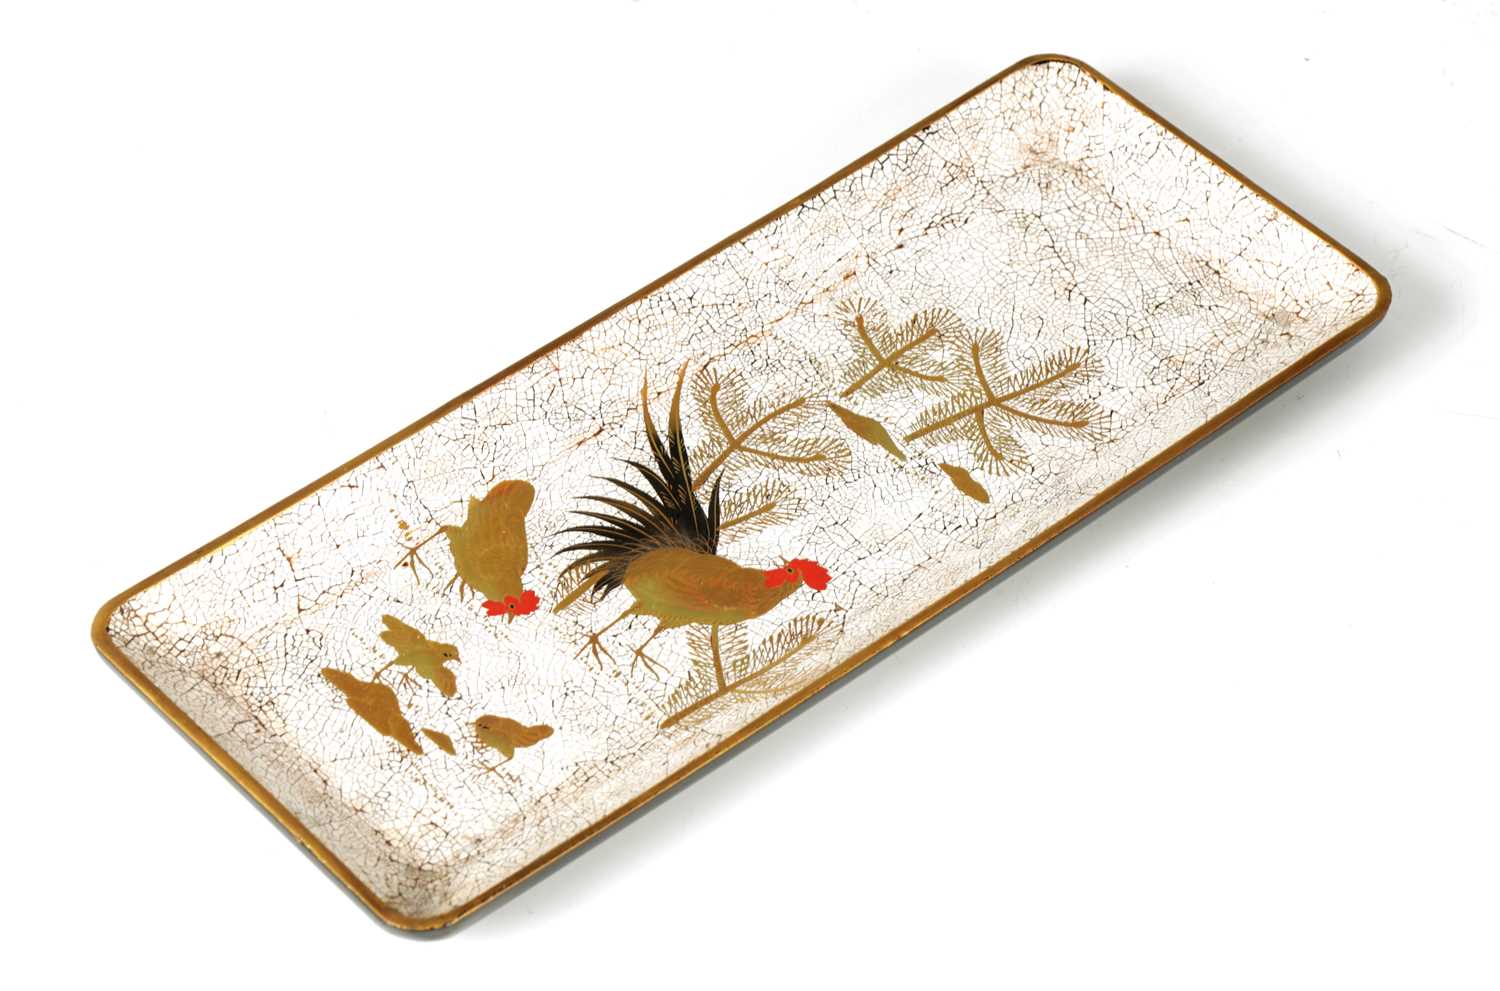 Lot 126 - A MEIJI PERIOD JAPANESE LACQUER WORK TRAY